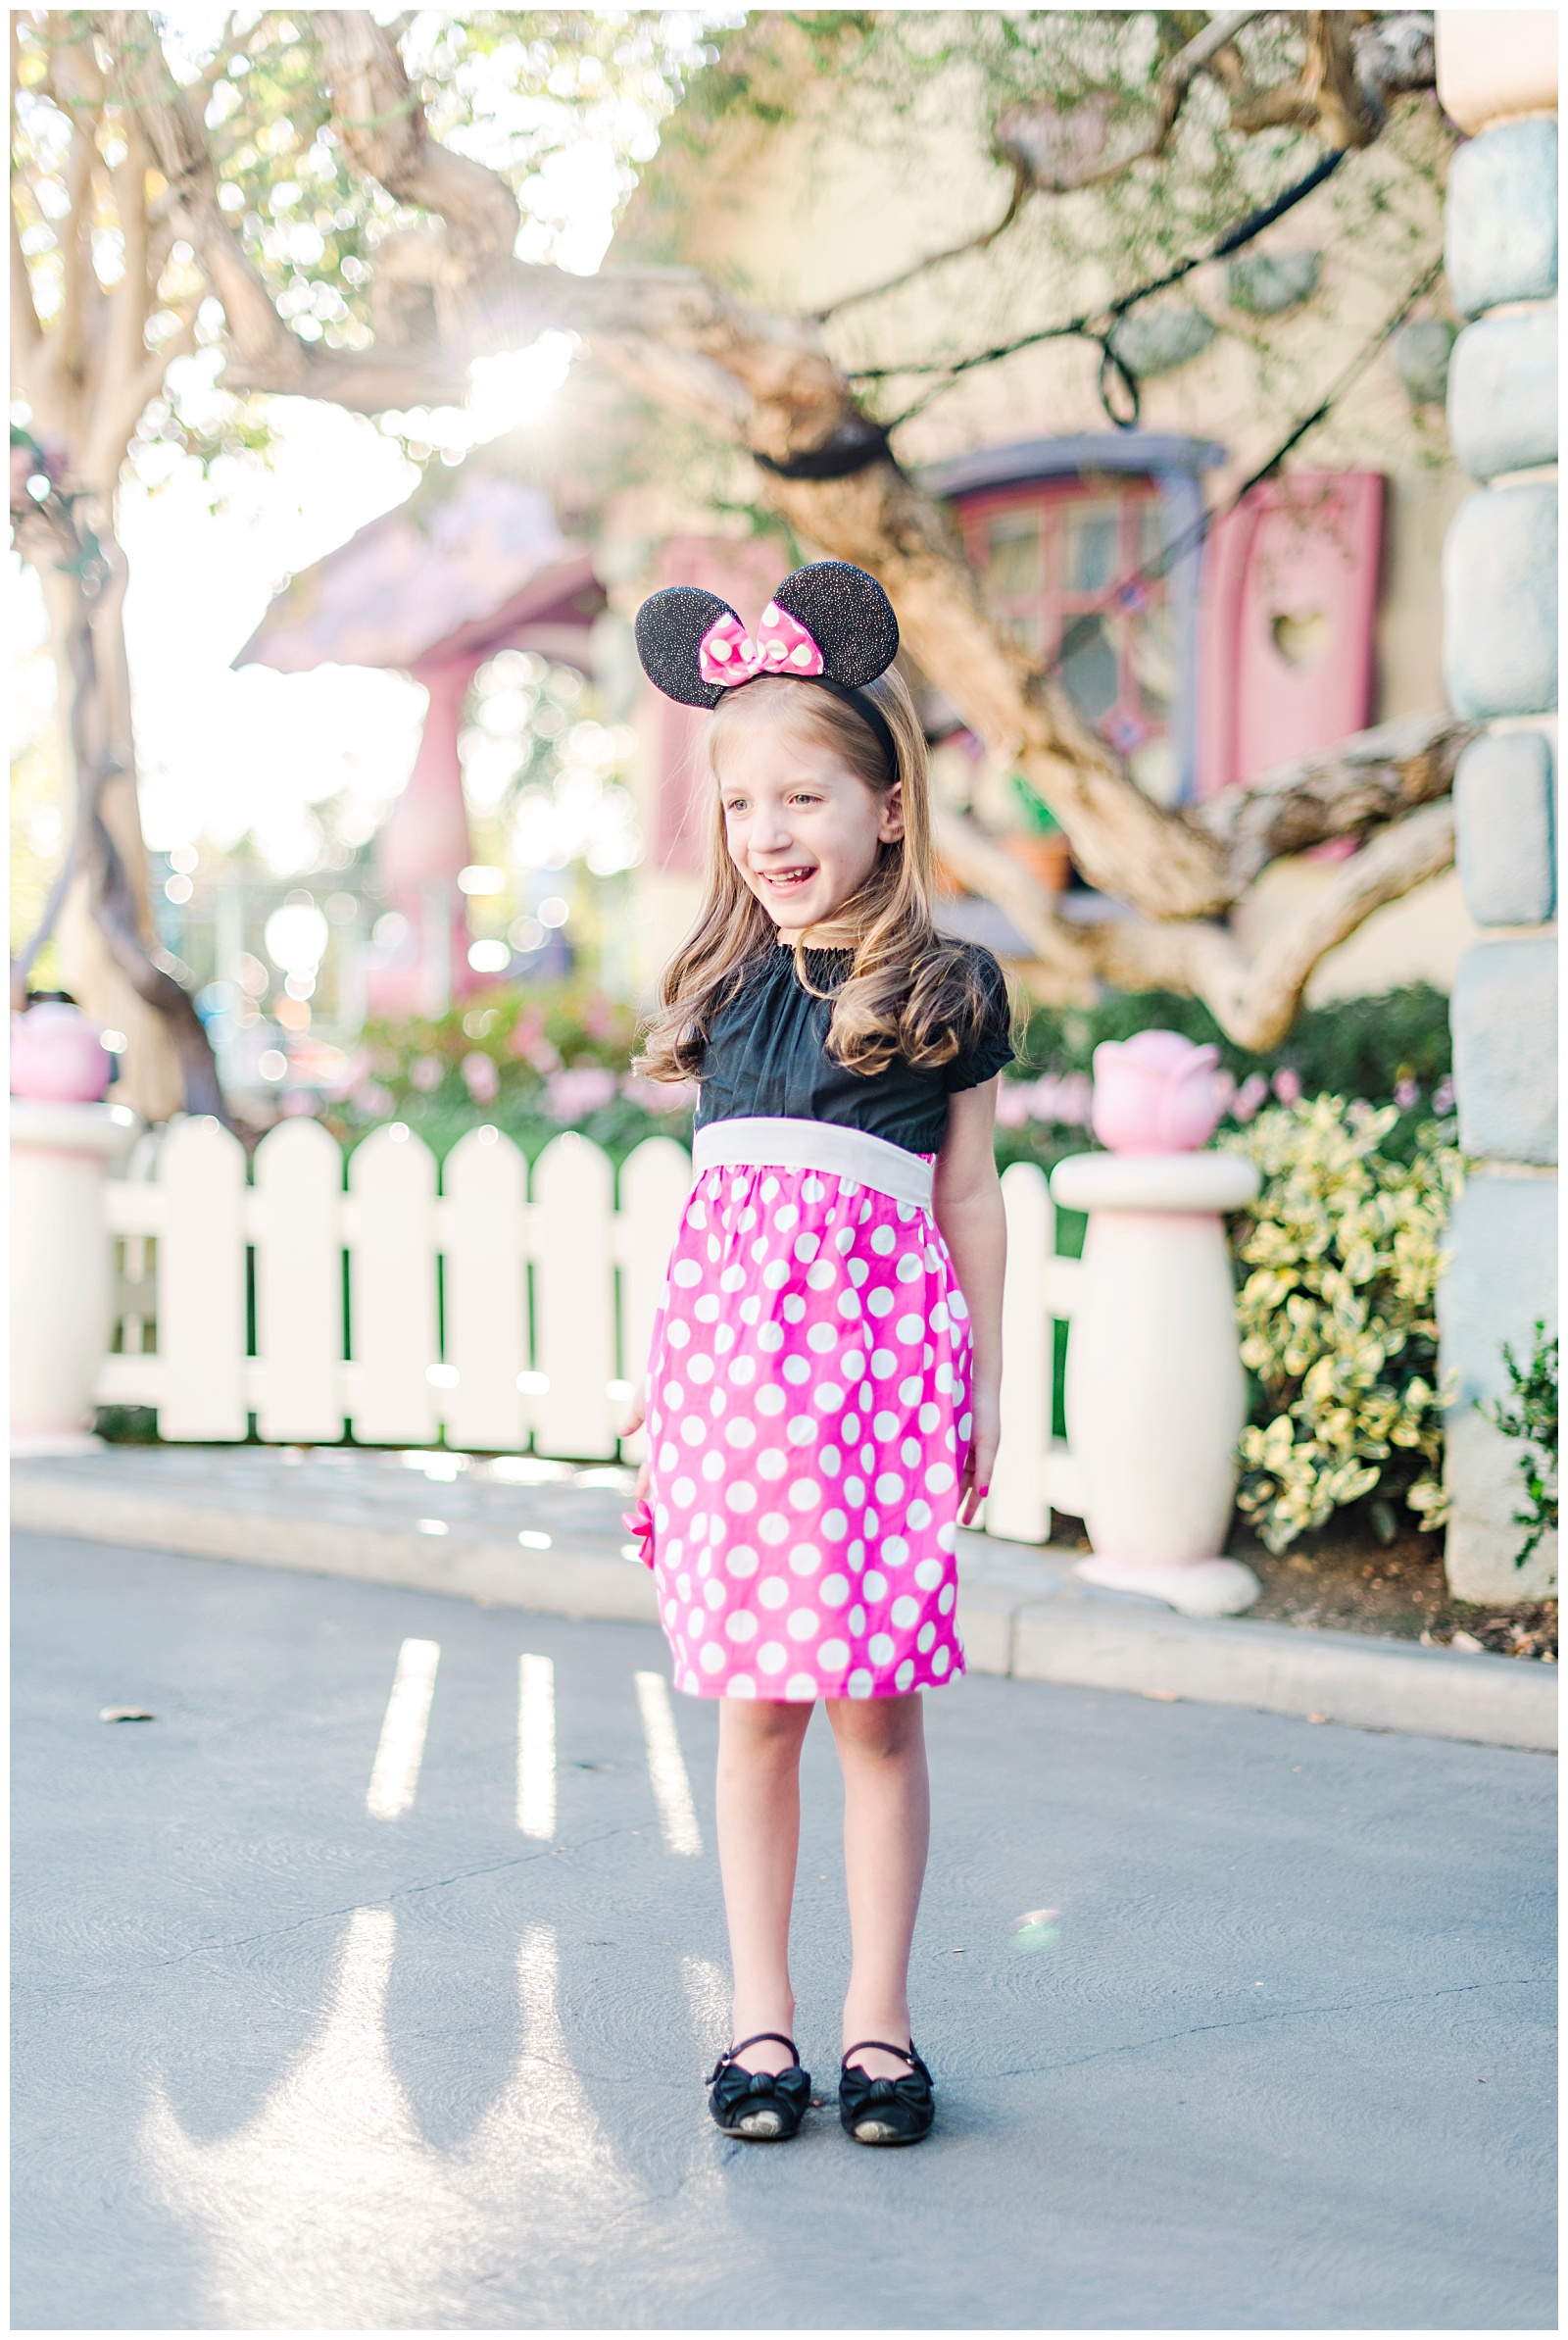 Disneyland Portrait Session.  Photography by Mollie Jane Photography.  To see more visit www.molliejanephotography.com